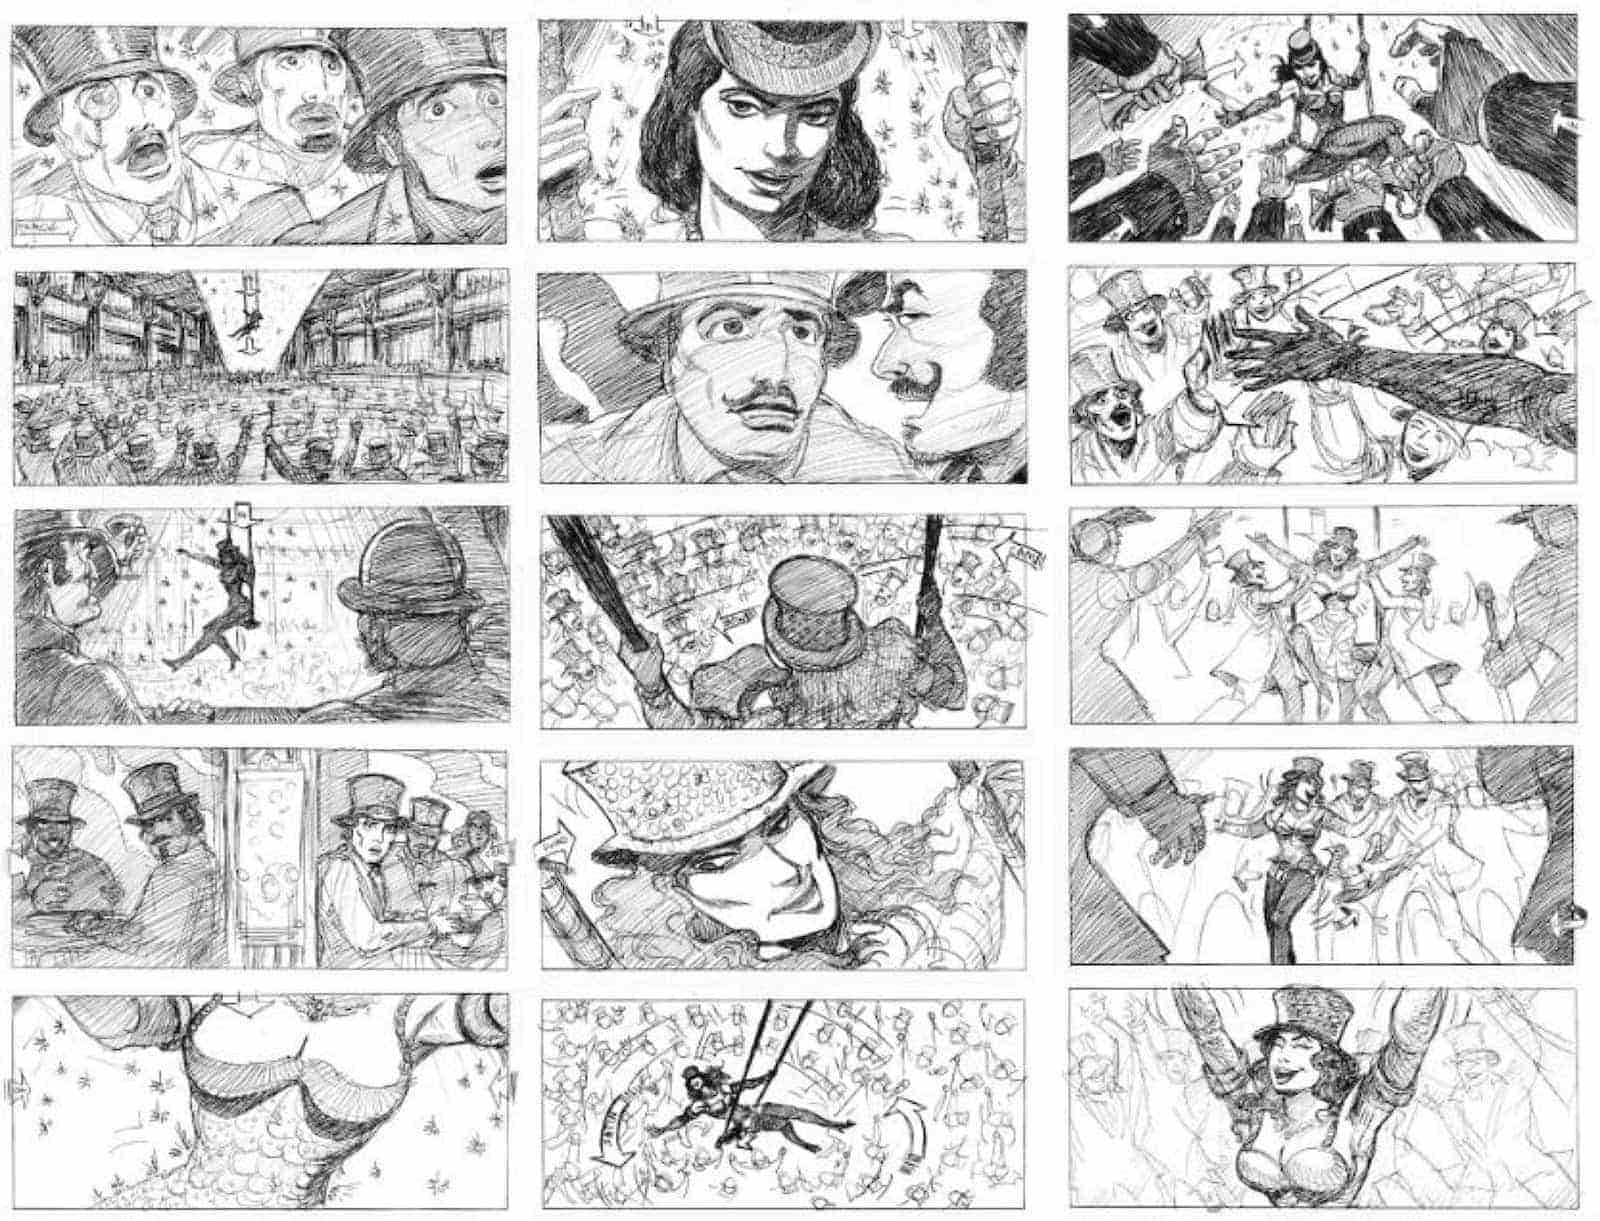 Storyboard Examples for Film - Storyboard Ideas - David Russell - Moulin Rouge Storyboard - StudioBinder